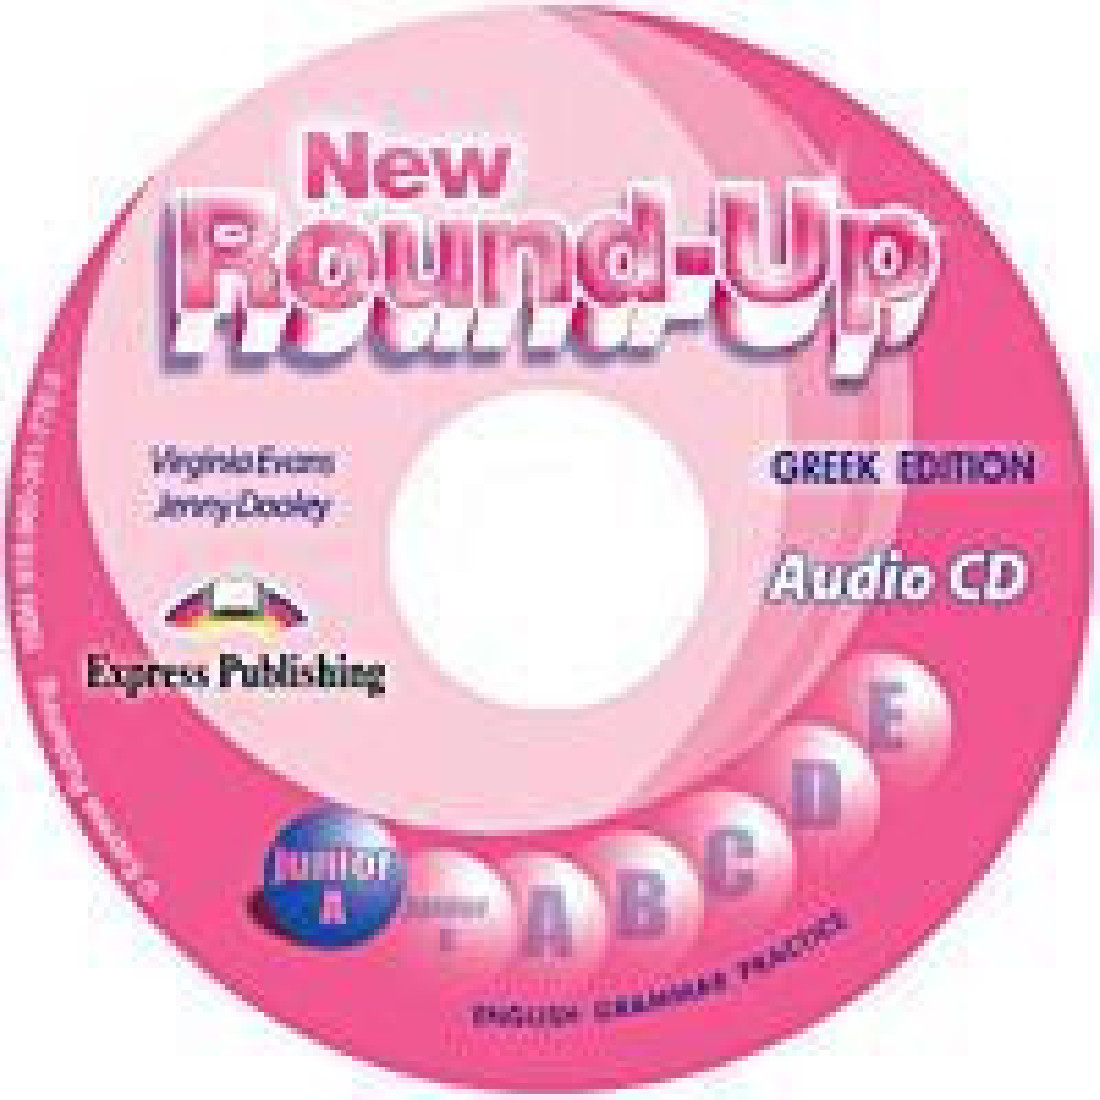 NEW ROUND UP JUNIOR A CD